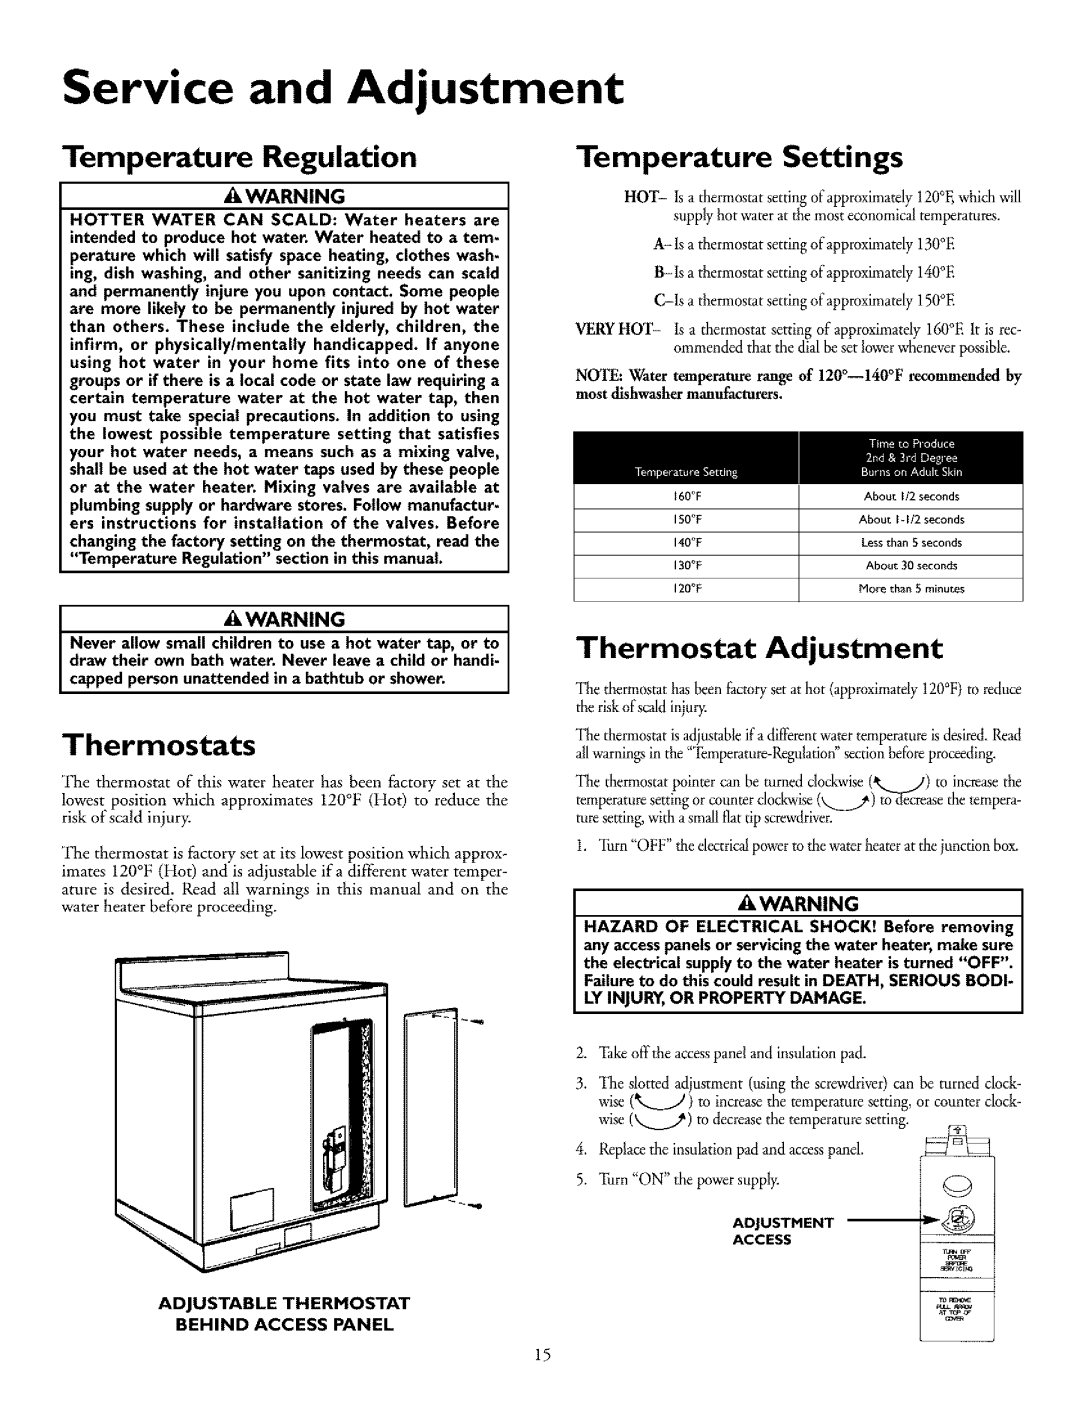 Kenmore 153.318031, 153.318131 Service and Adjustment, Temperature Regulation, Temperature Settings, Thermostats 